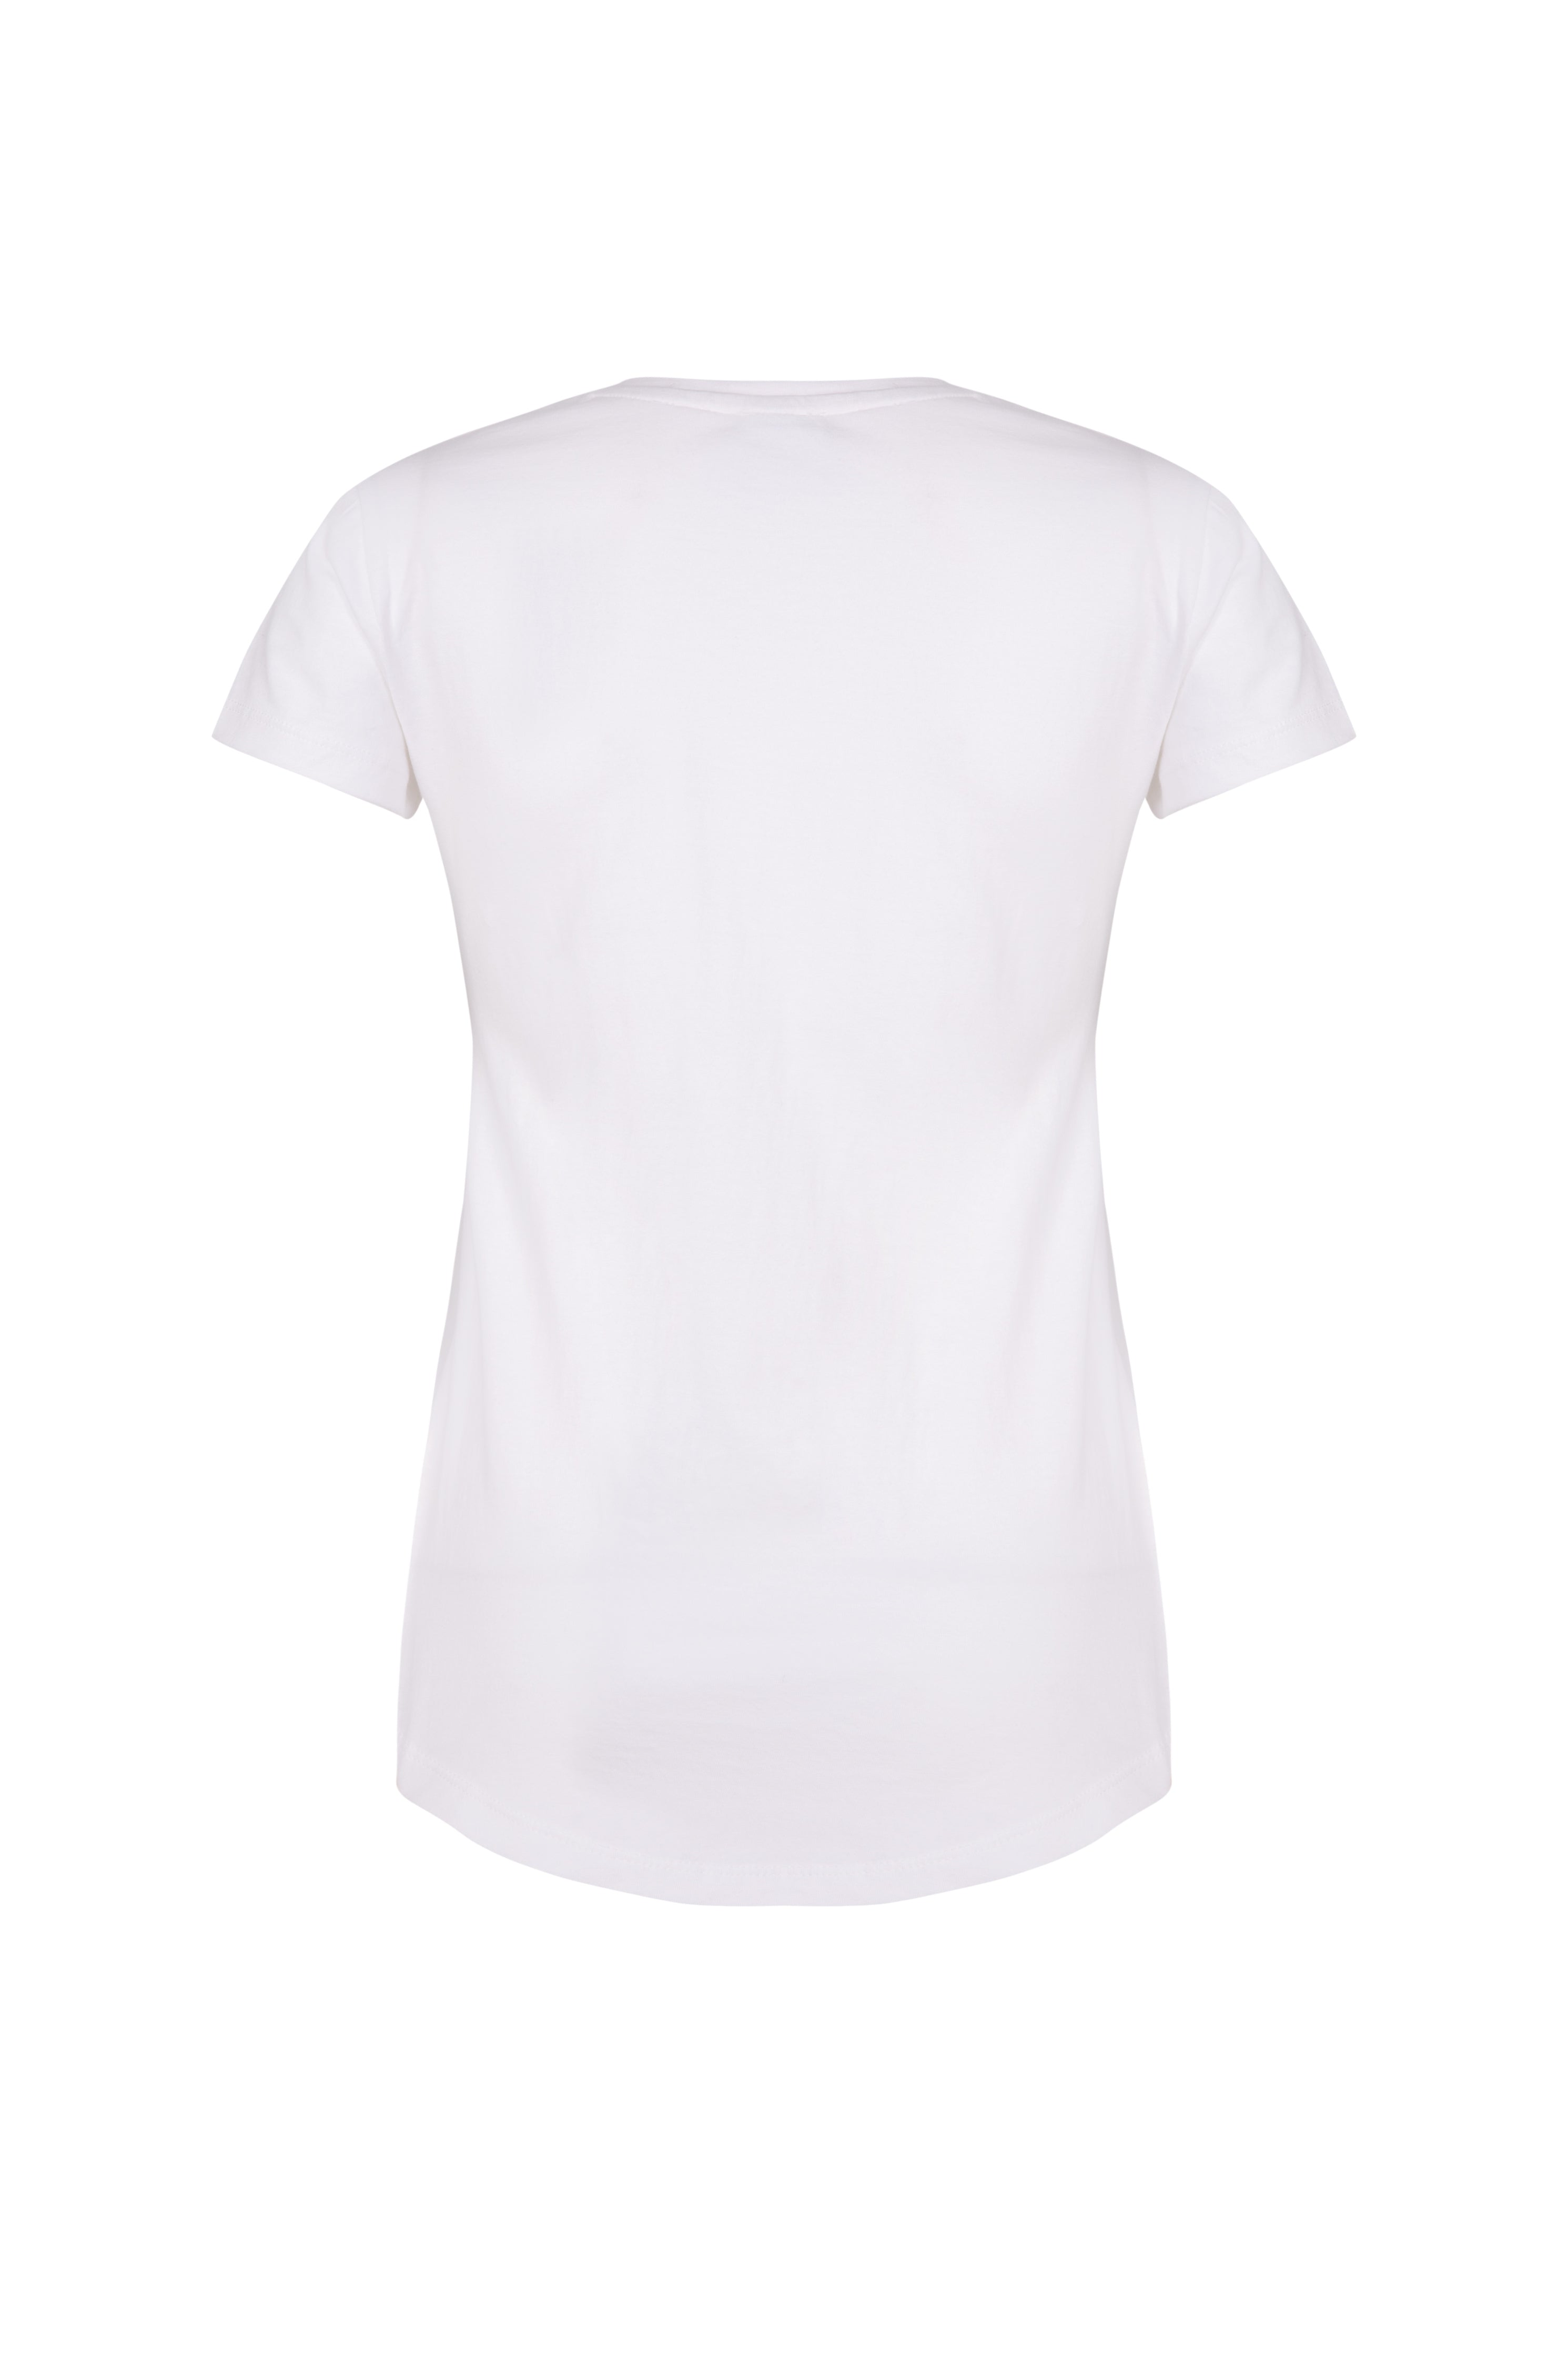 Back of white organic cotton fitted women's t-shirt